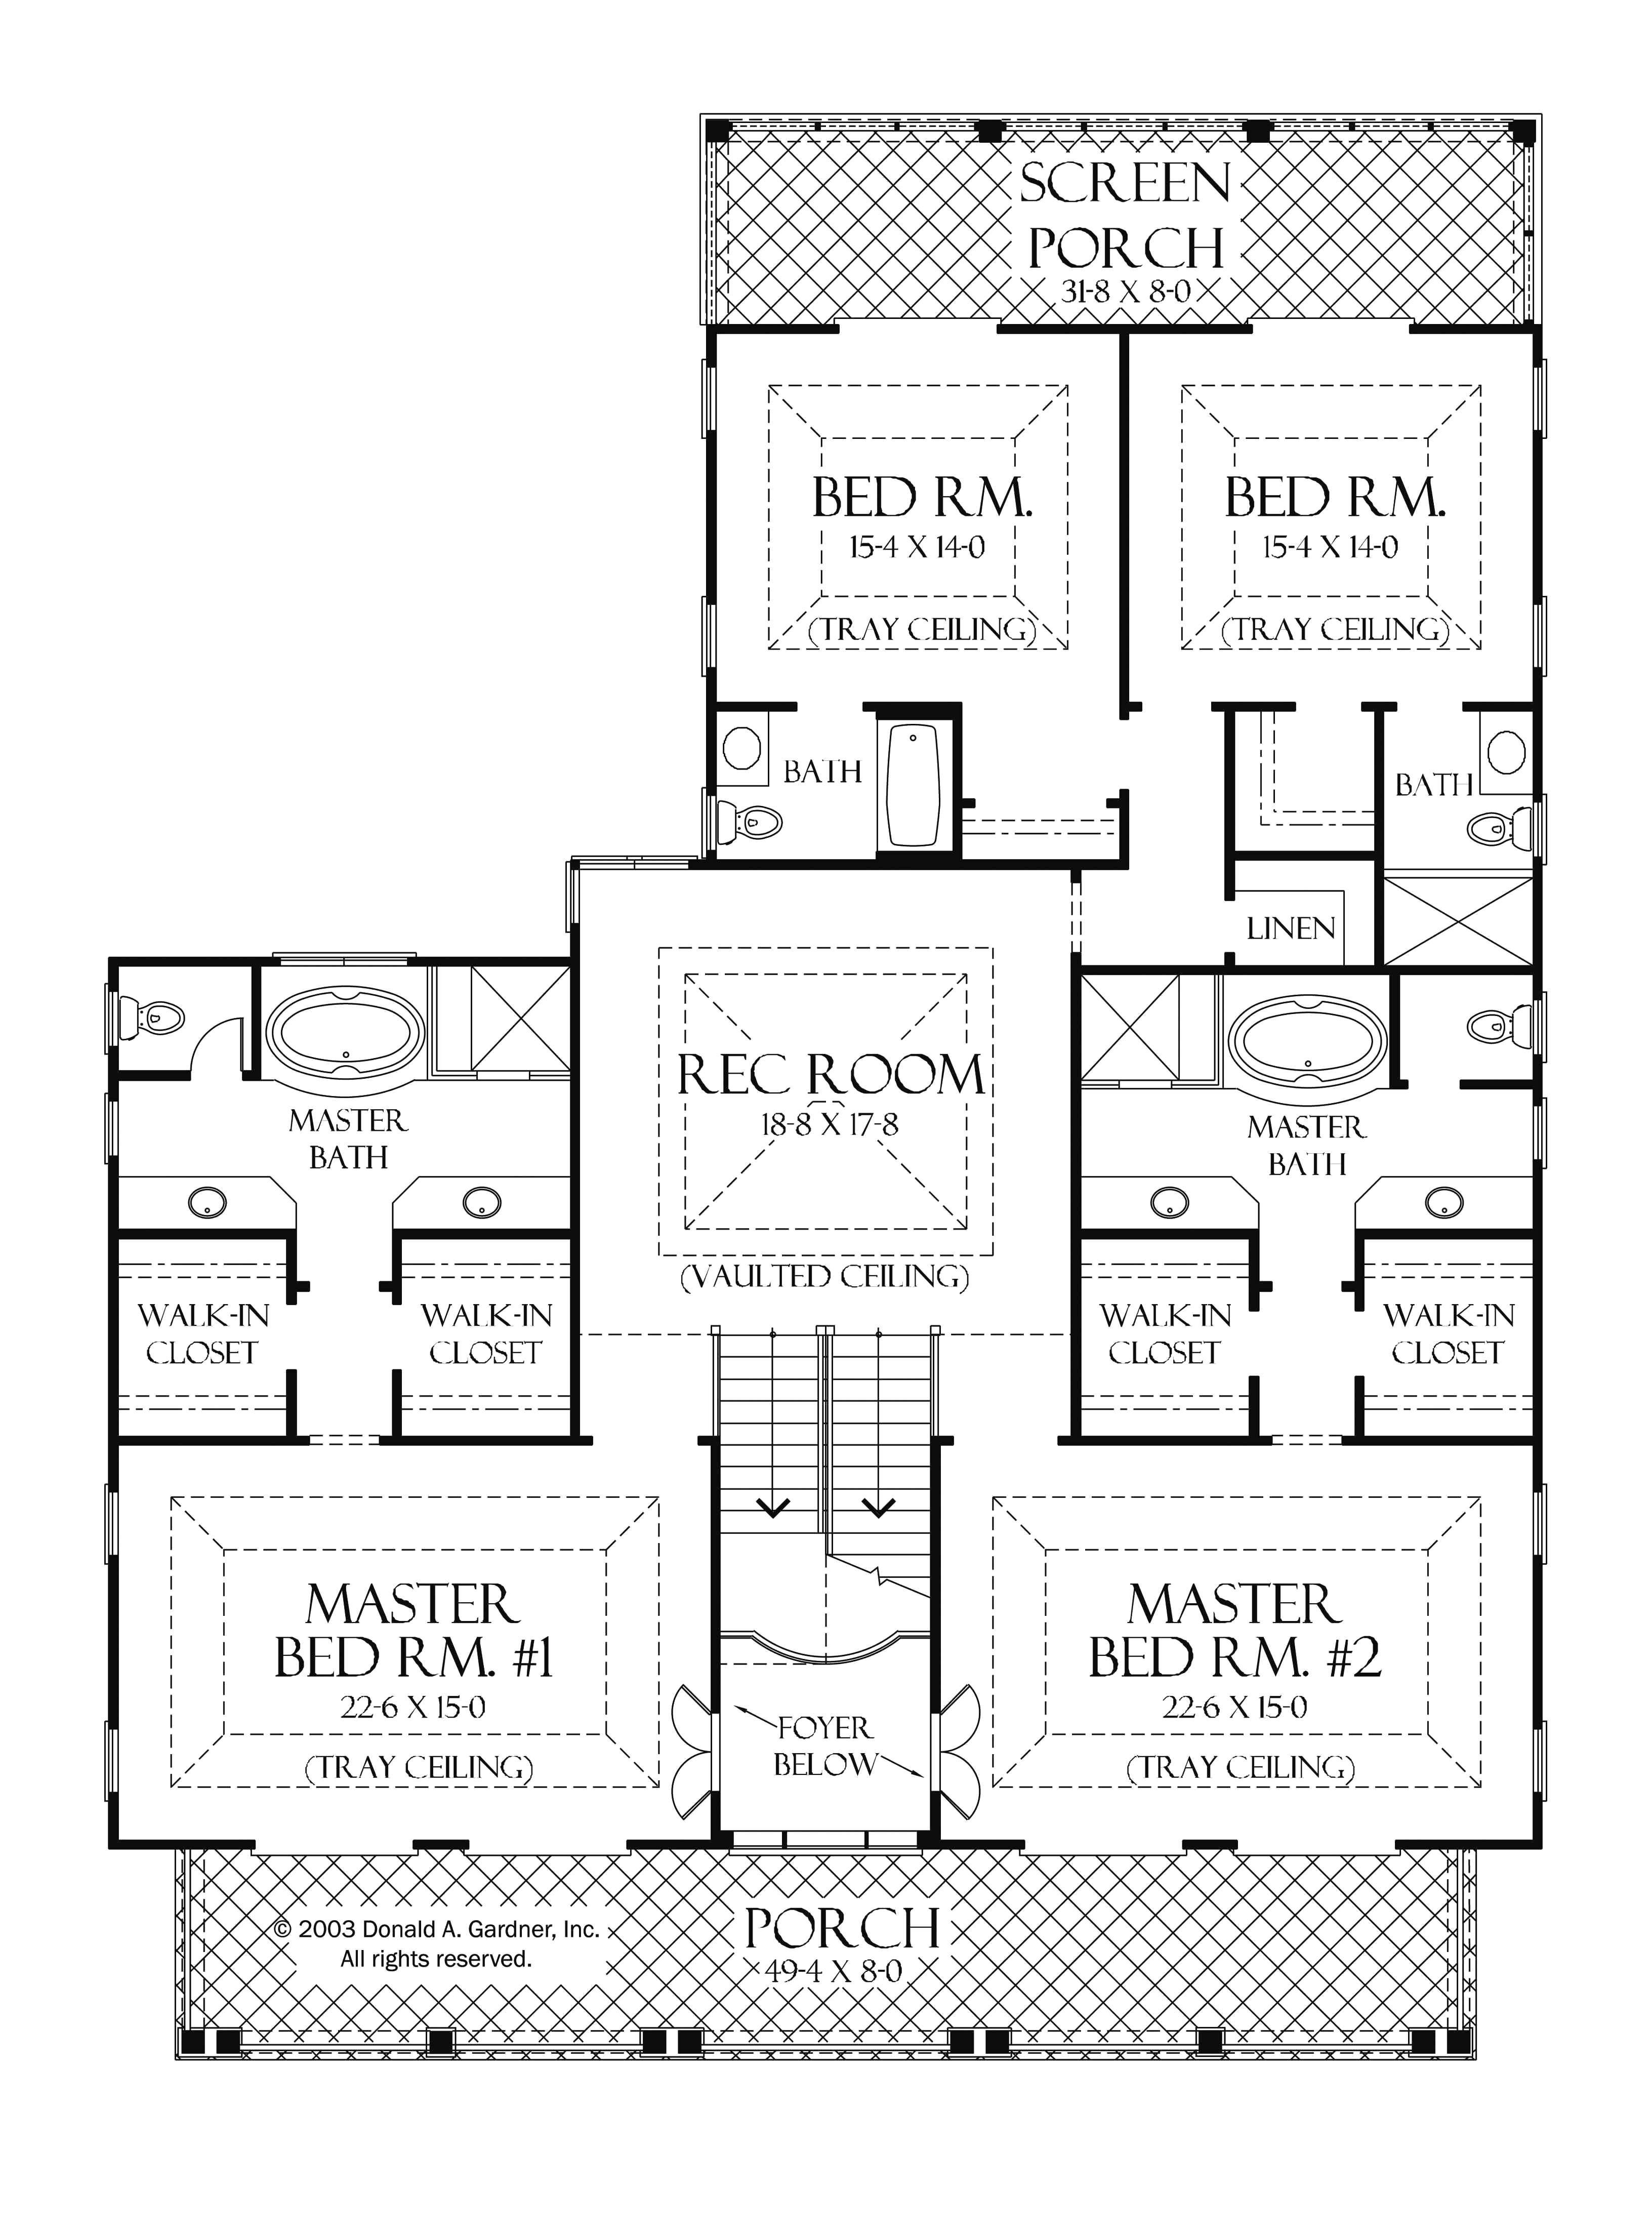 House Plans with Two Master Suites On First Floor House Plans with Two Master Bedrooms Elegant Two Bedroom Floor Plans